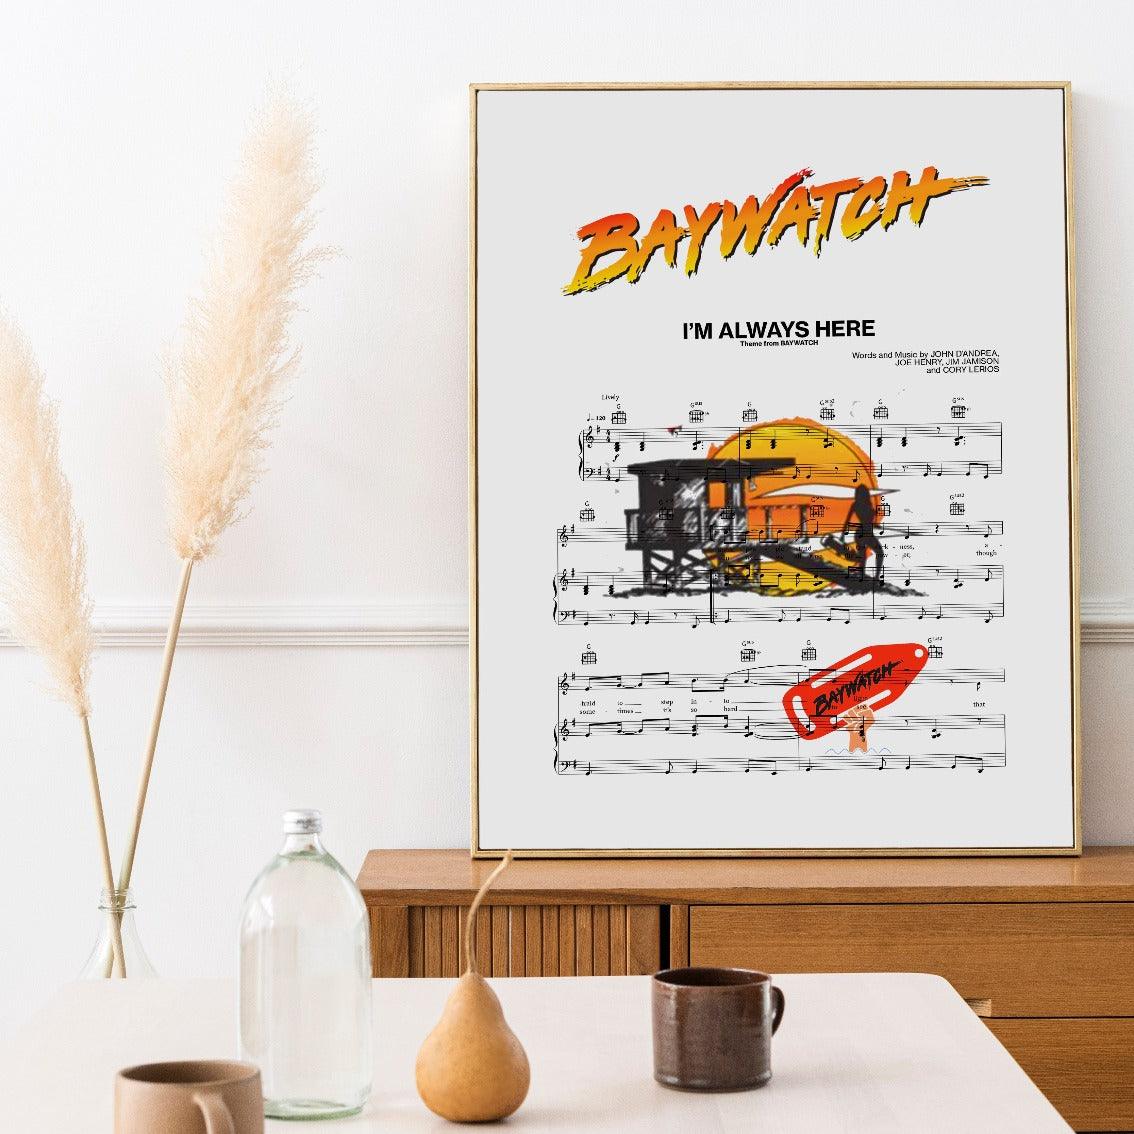 Give your walls some attitude with this cool and unique poster. This high-quality print is the perfect way to show your love for your favorite song. It also makes for a unique and personalized gift for any music lover.